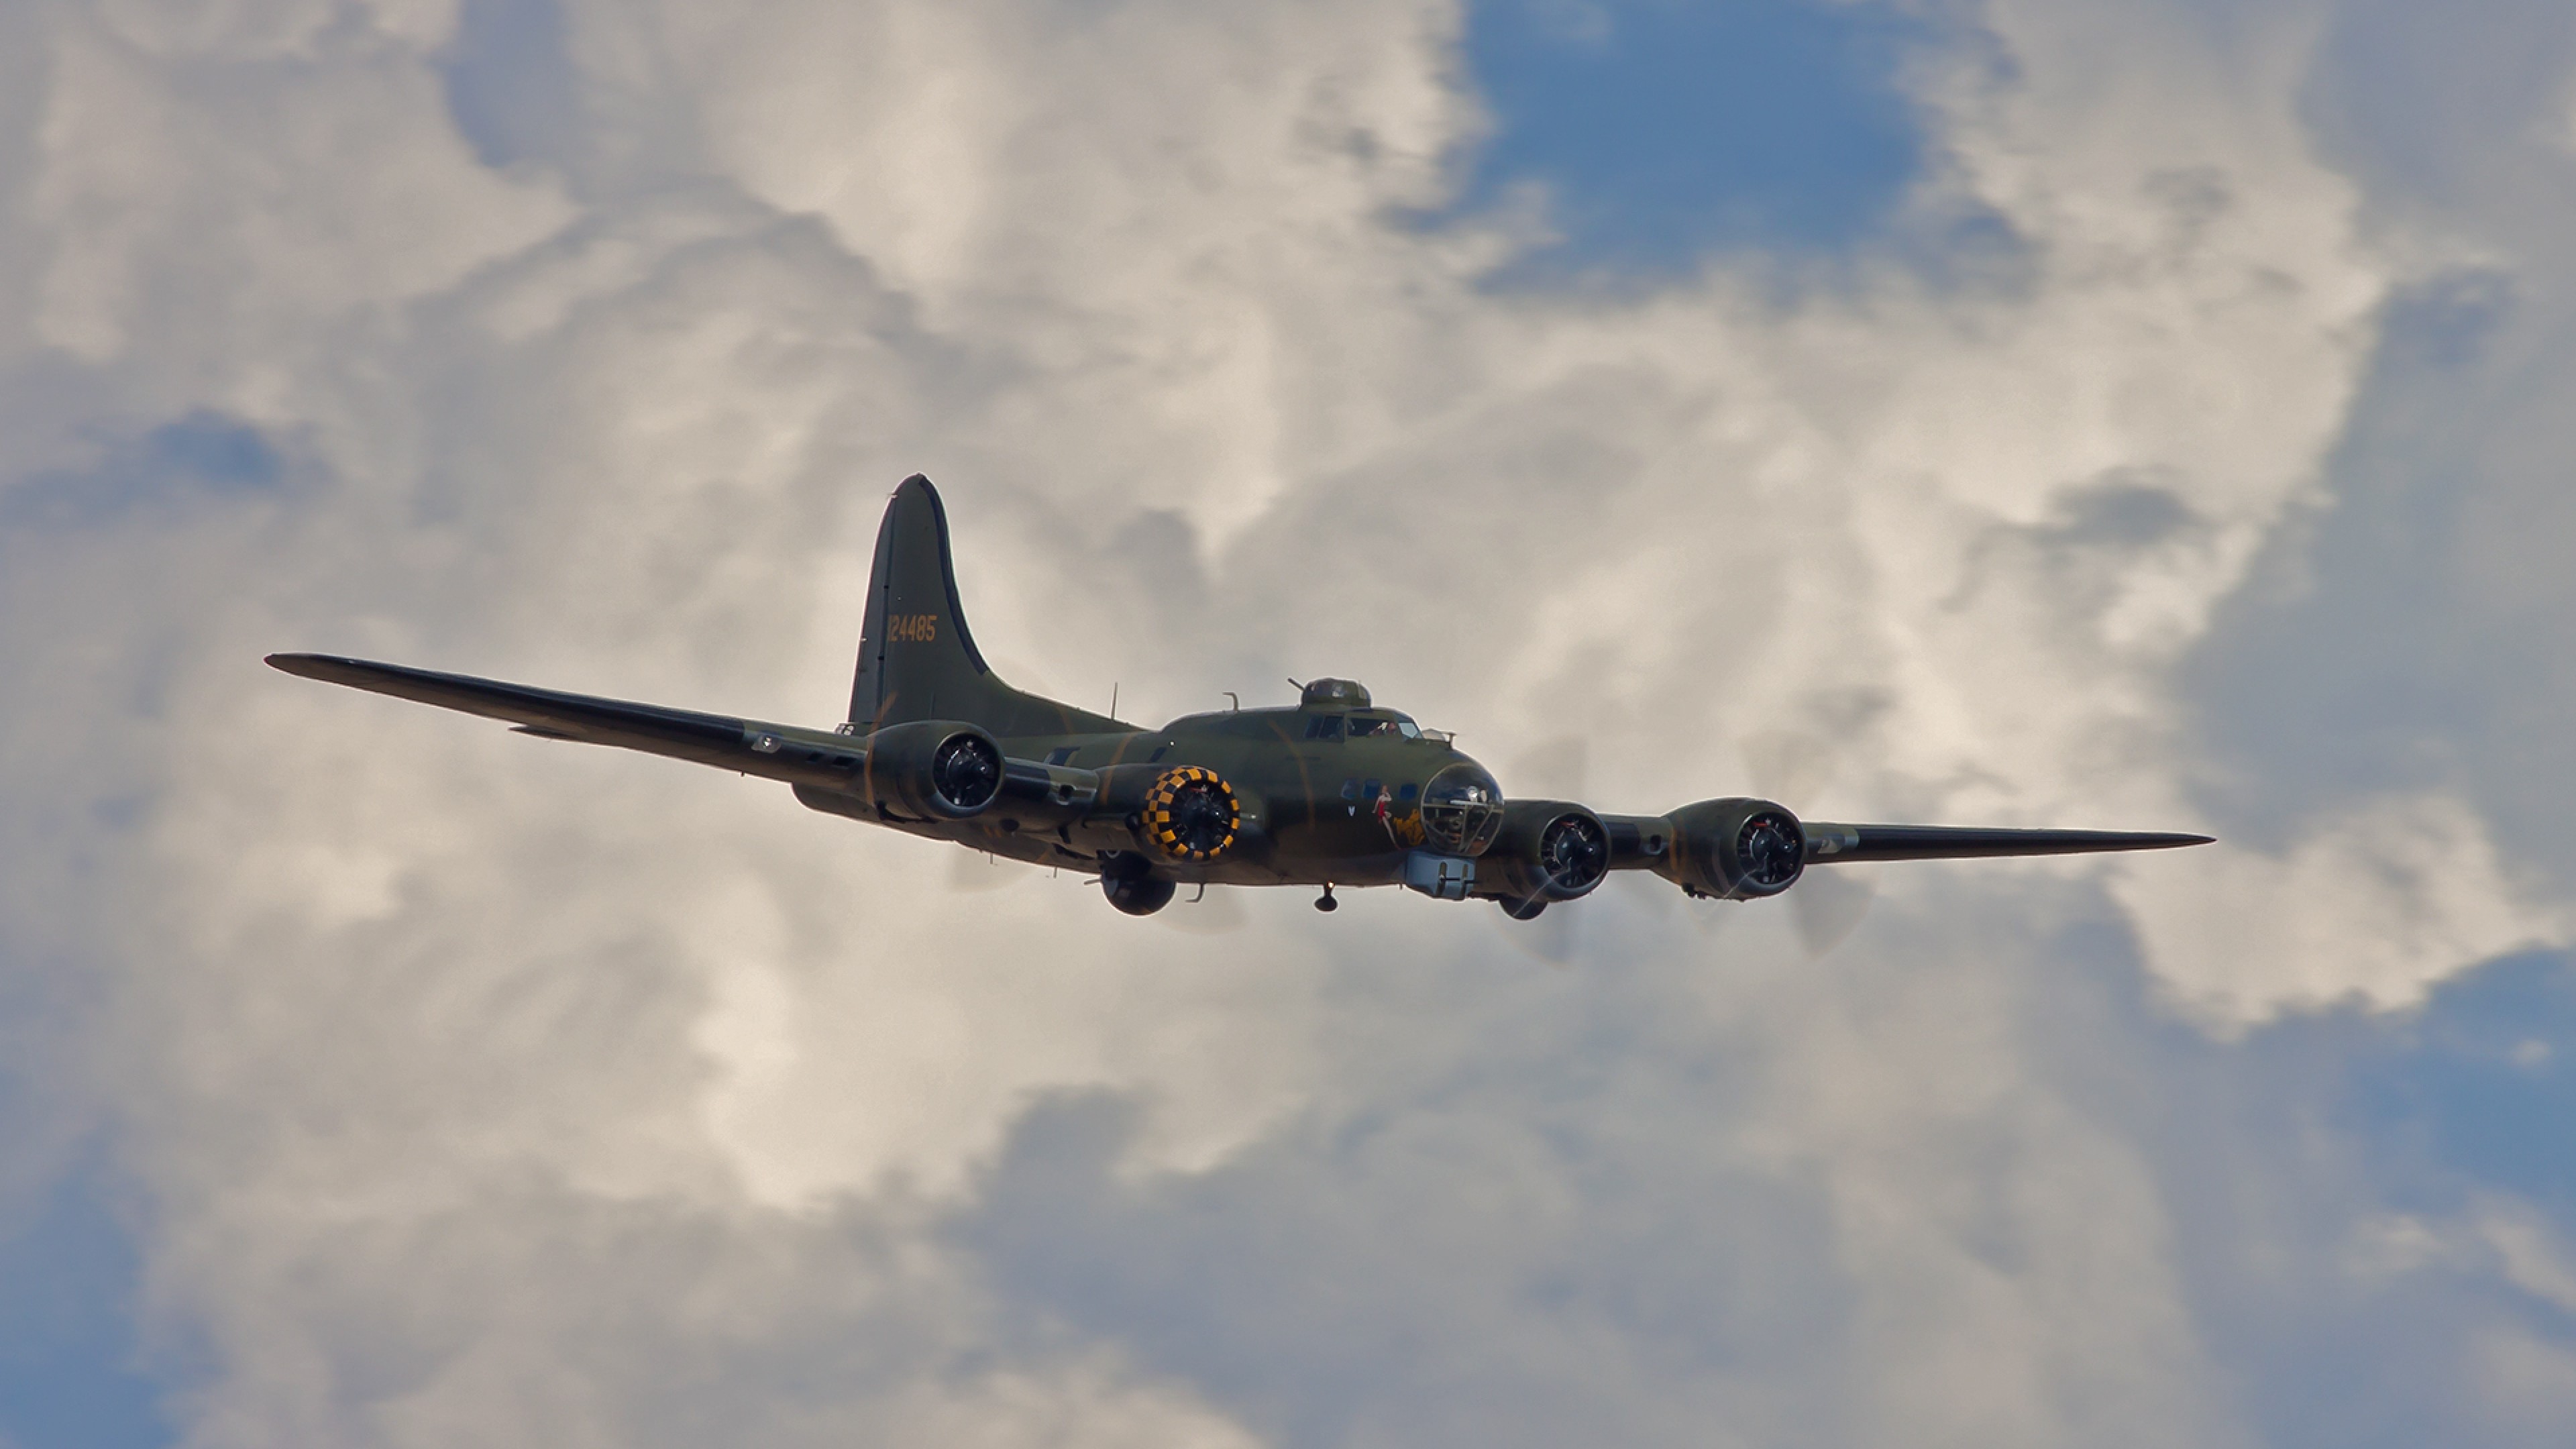 Wallpaper boeing b 17, flying fortress, bomber, sky, clouds